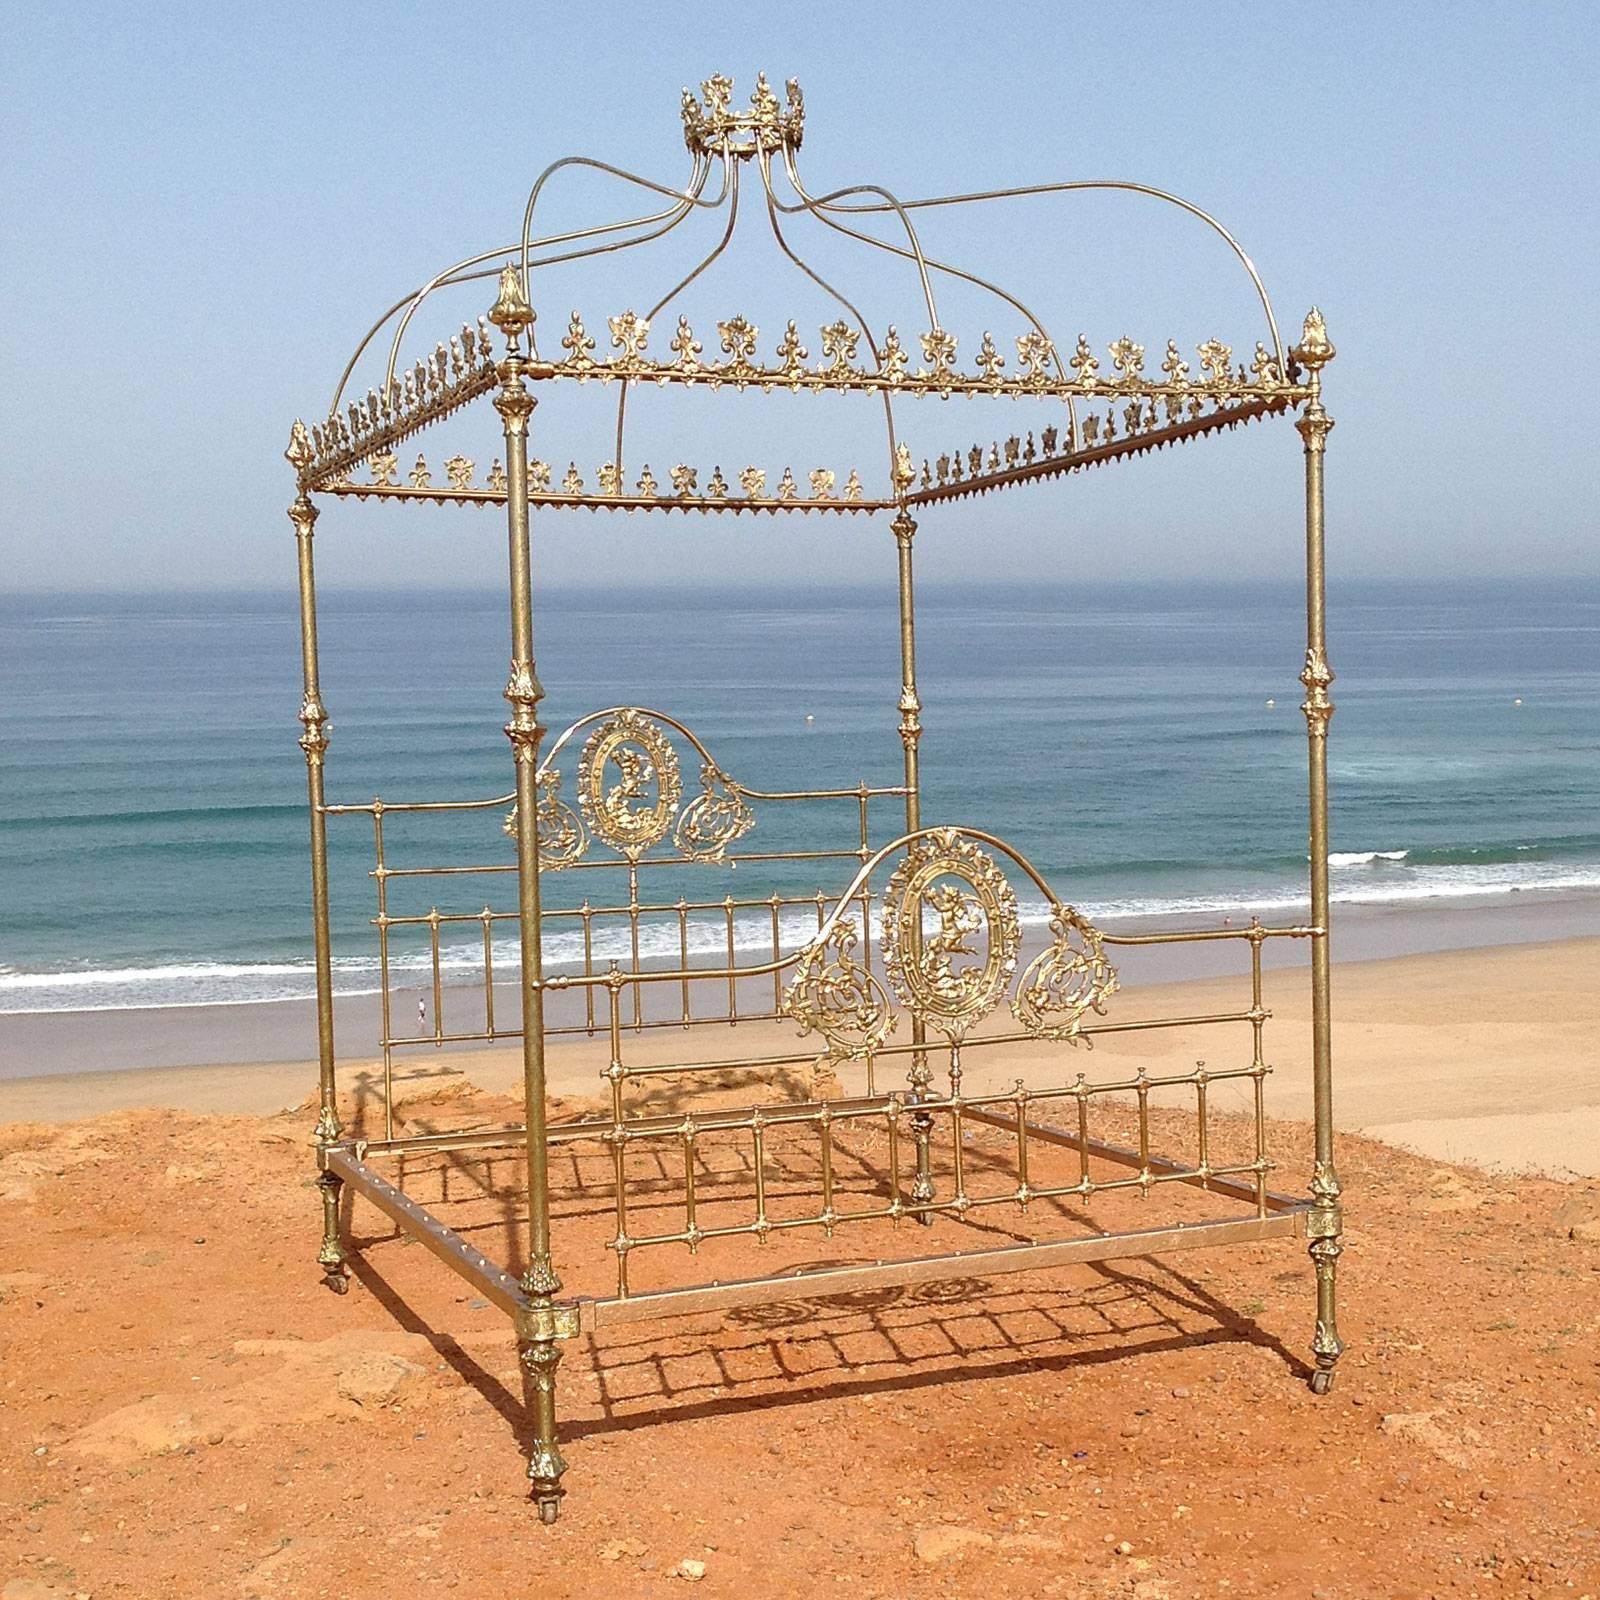 A magnificent all brass four poster bed with tall posts, decorative brass fittings and central brass plaques depicting cherubs amongst vines and foliage. The etched posts and decorative brass fittings on the posts and at the "kneecaps" and